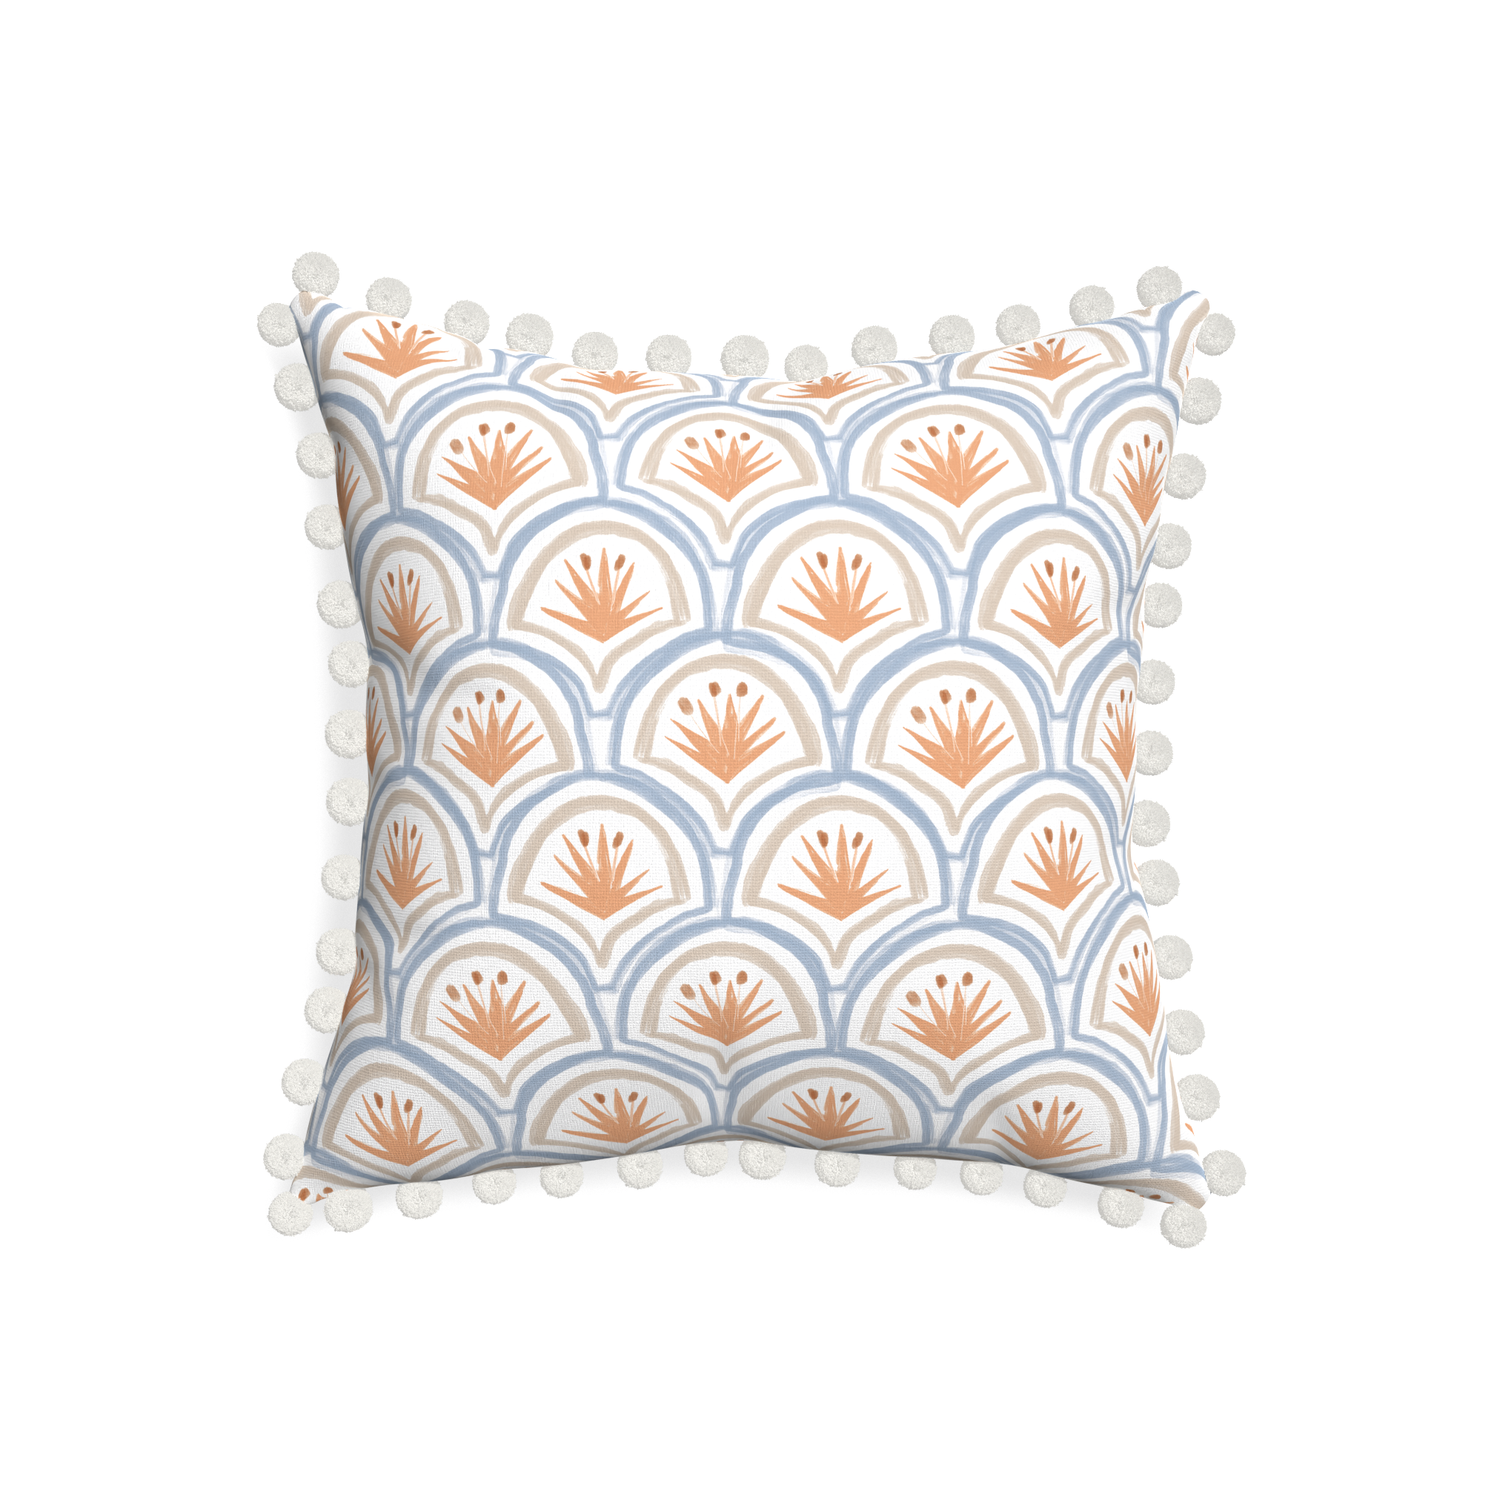 20-square thatcher apricot custom pillow with snow pom pom on white background